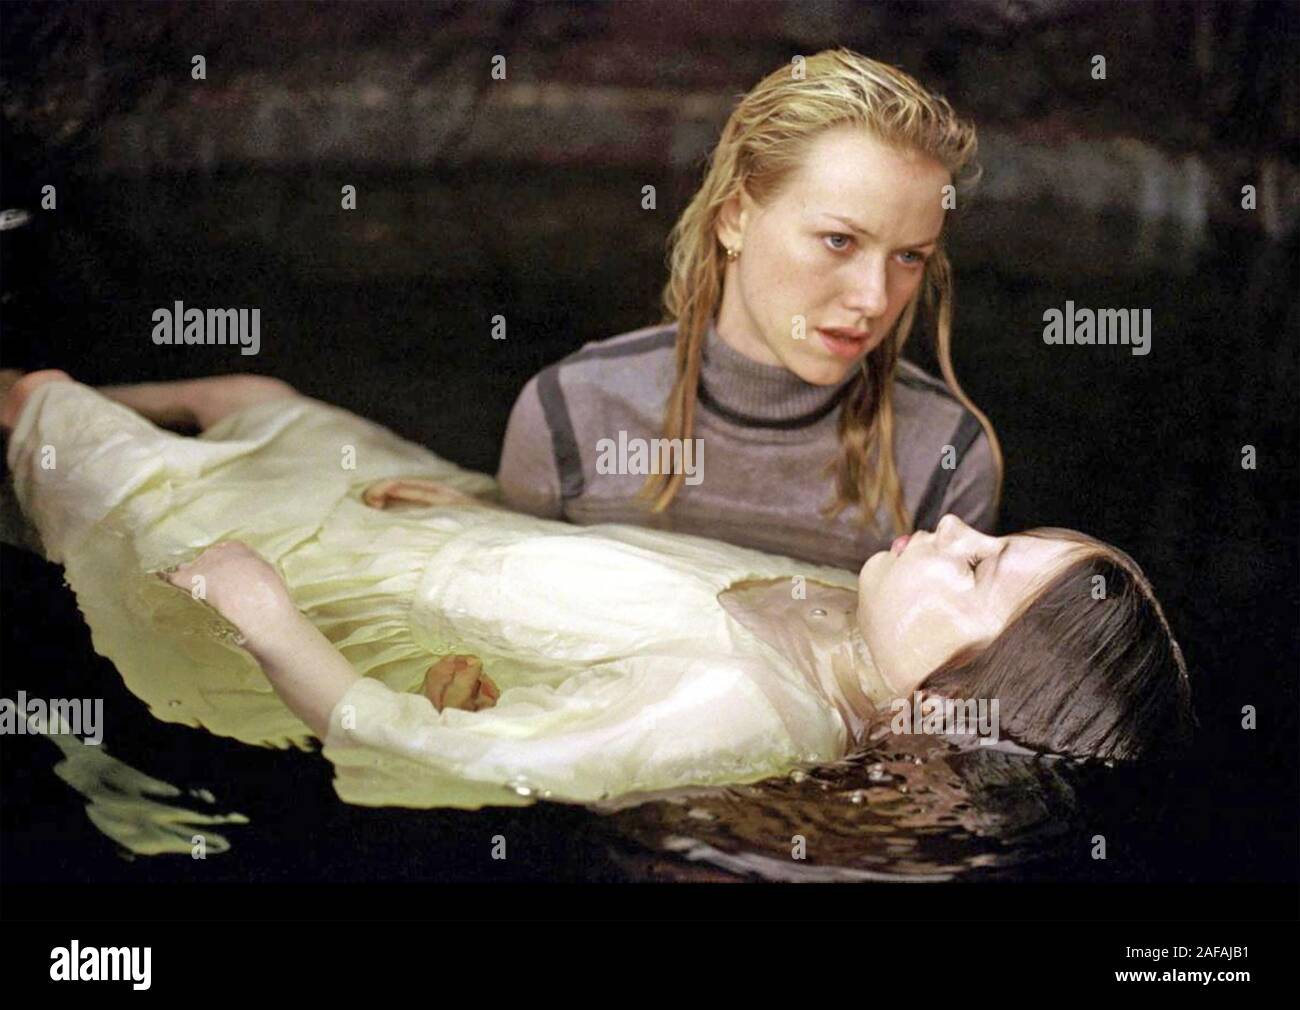 THE RING 2002 DreamWorks Pictures film with Naomi Watts Stock Photo